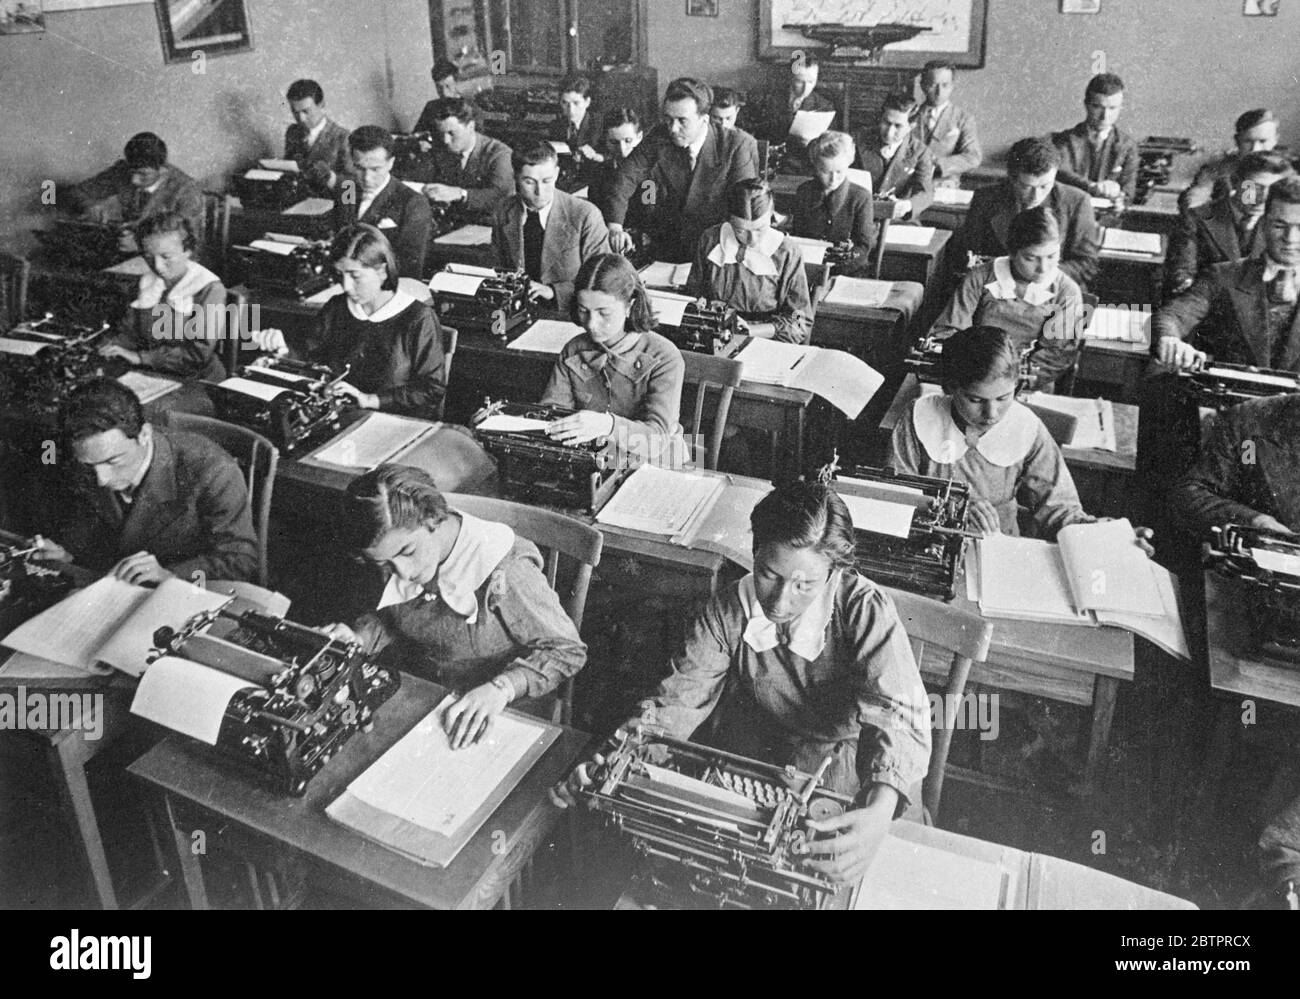 Young Turkey trains for business. Young men and women learning to operate typewriters at a commercial Institute in Ankara, the capital of Turkey. Under the westernising influence of Kemal Ataturk, the Turkish dictator, Turkey is giving up the bazaar as a trading centre in favour of busy modern offices and departments stores. 8 January 1938 Stock Photo